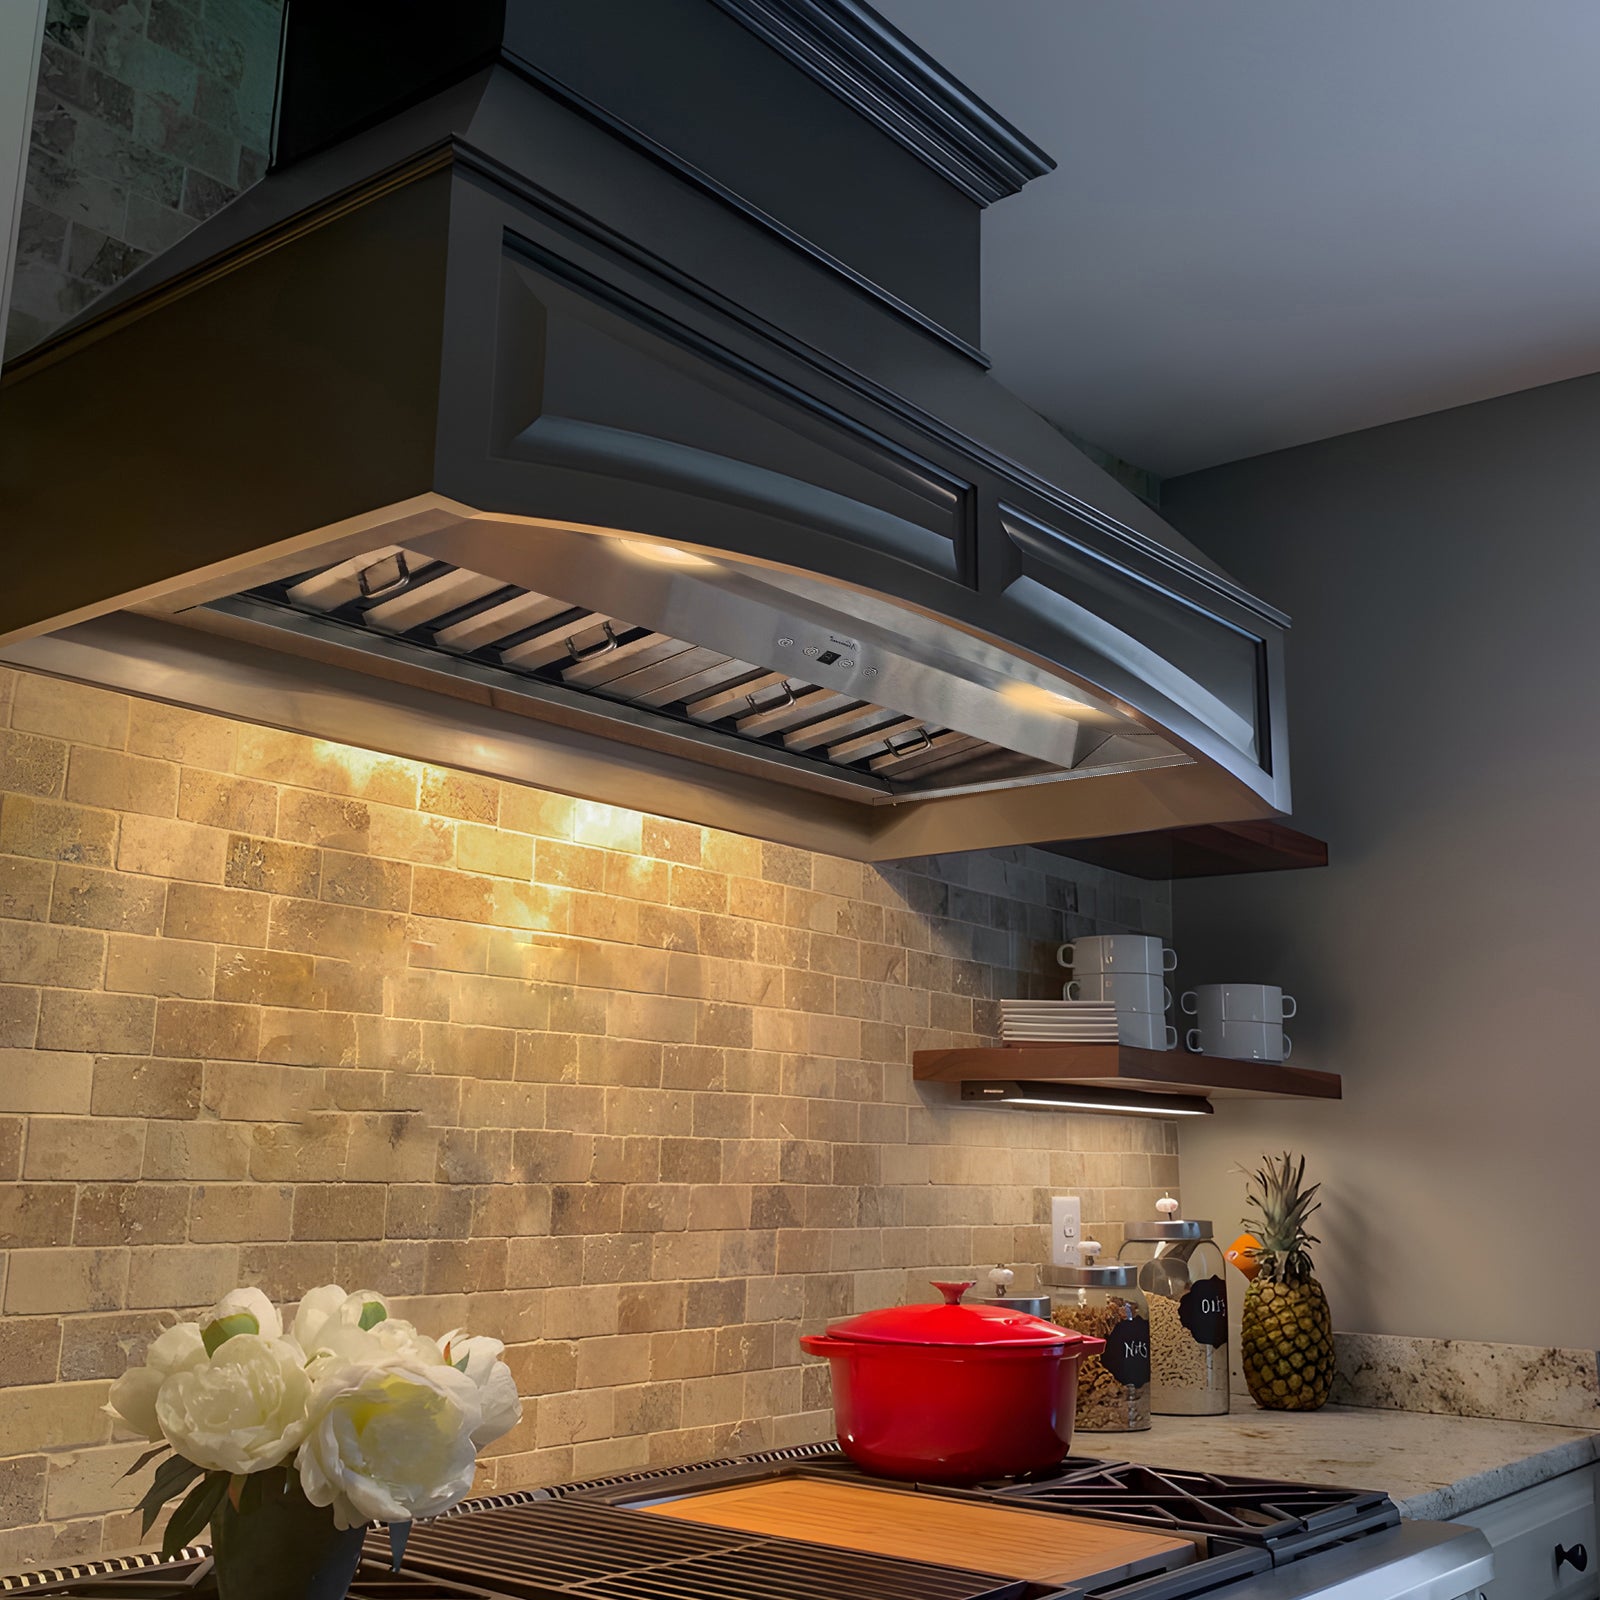 Range Hood Insert 30 Inch, Ultra Quiet, Powerful Suction Built-in Kitchen  Vent Hood, Stainless Steel Ducted Stove Hood with Dimmable LED Lights Warm